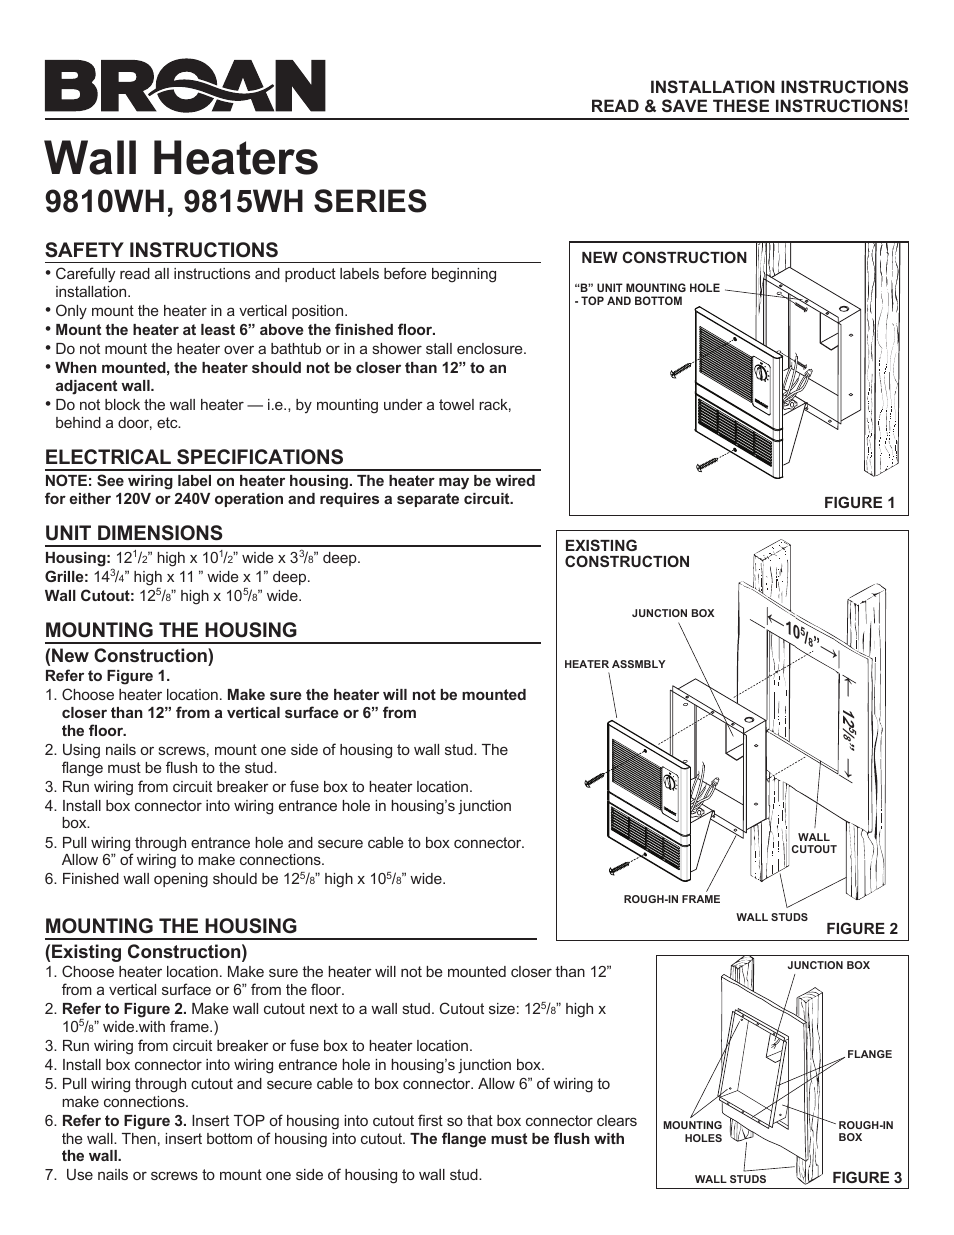 Wall Heaters 9815WH SERIES